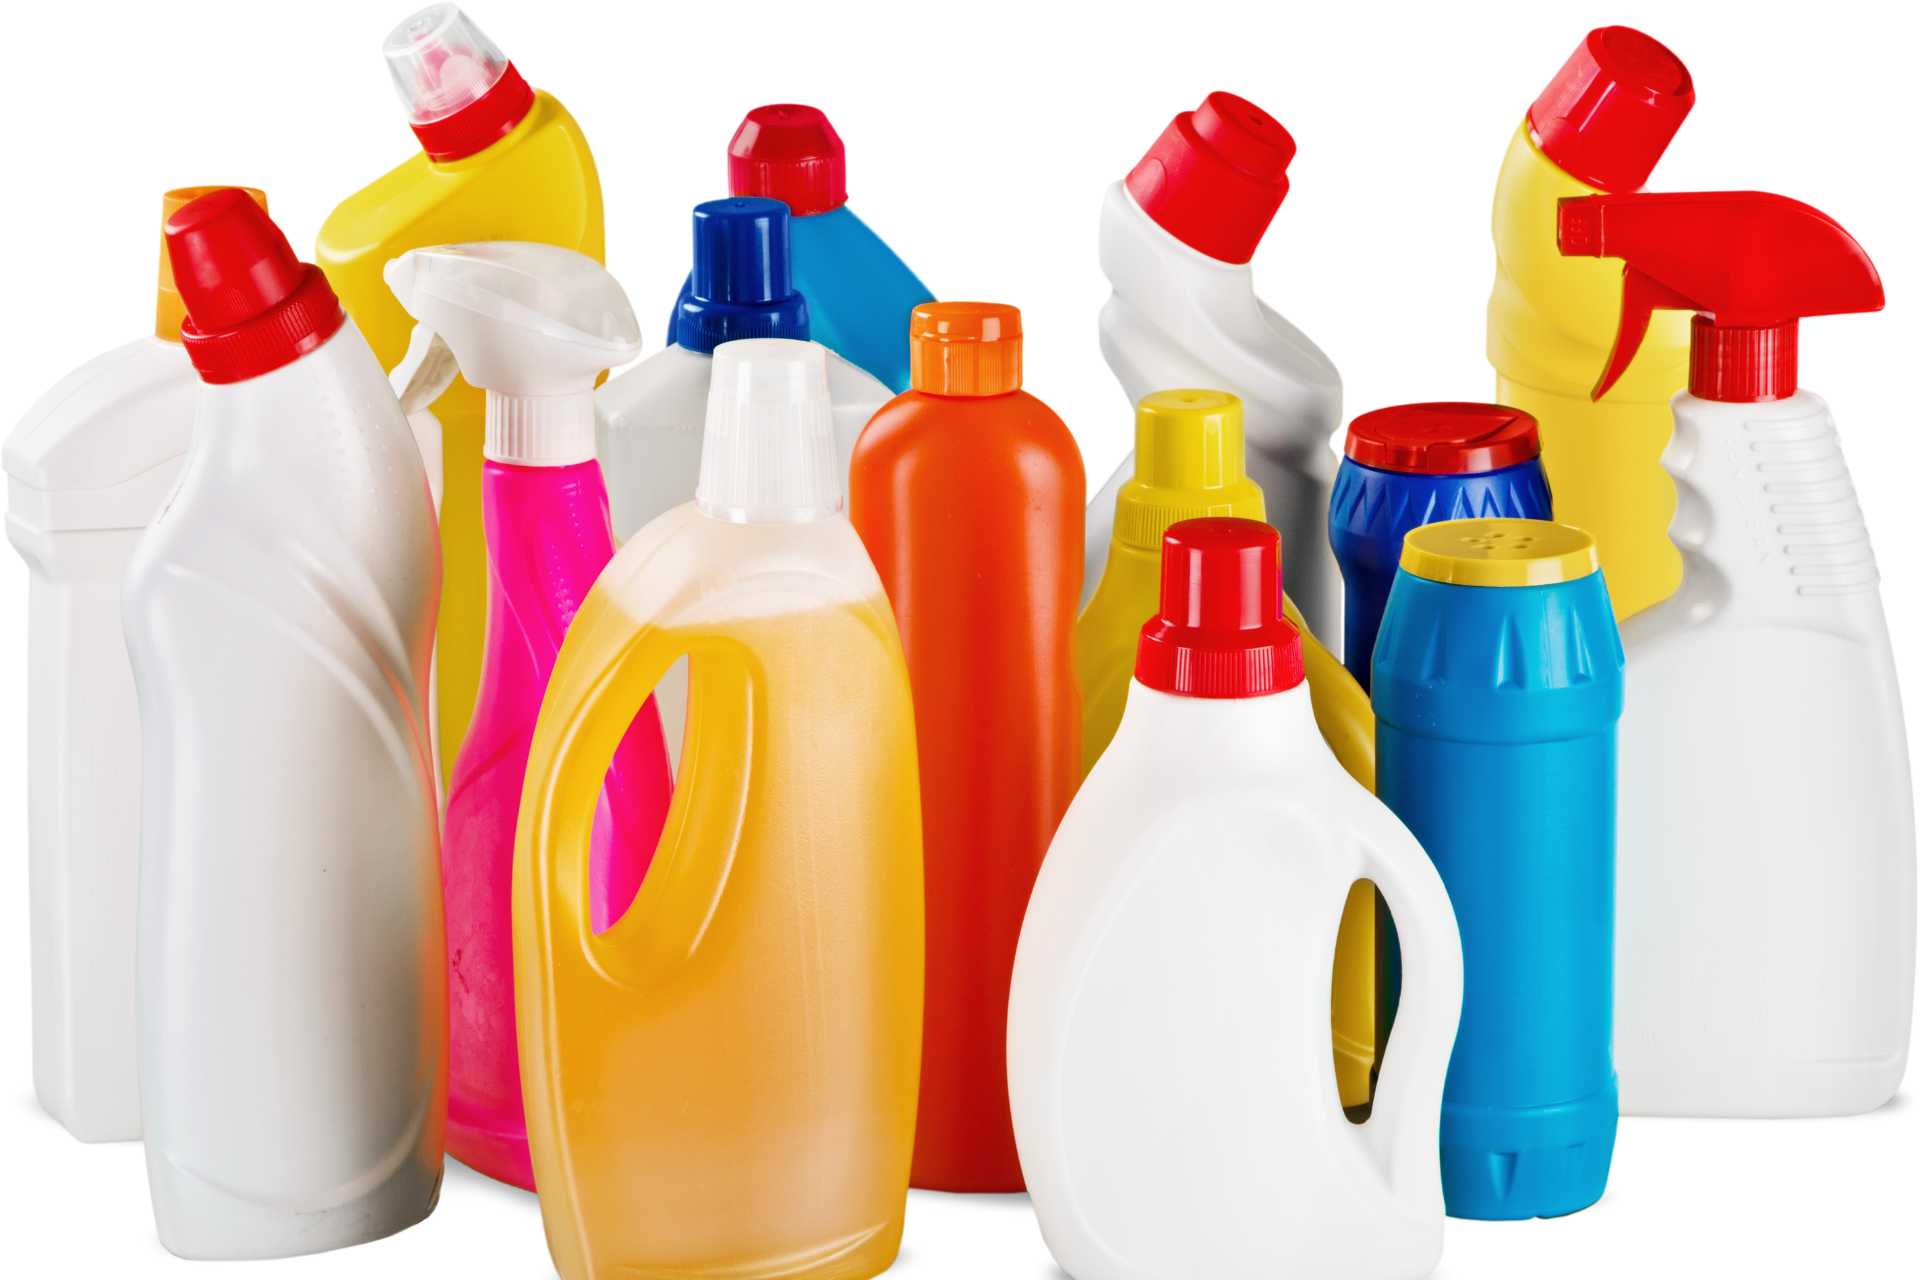 Safety First: Proper Handling and Storage of Industrial Cleaning Chemicals